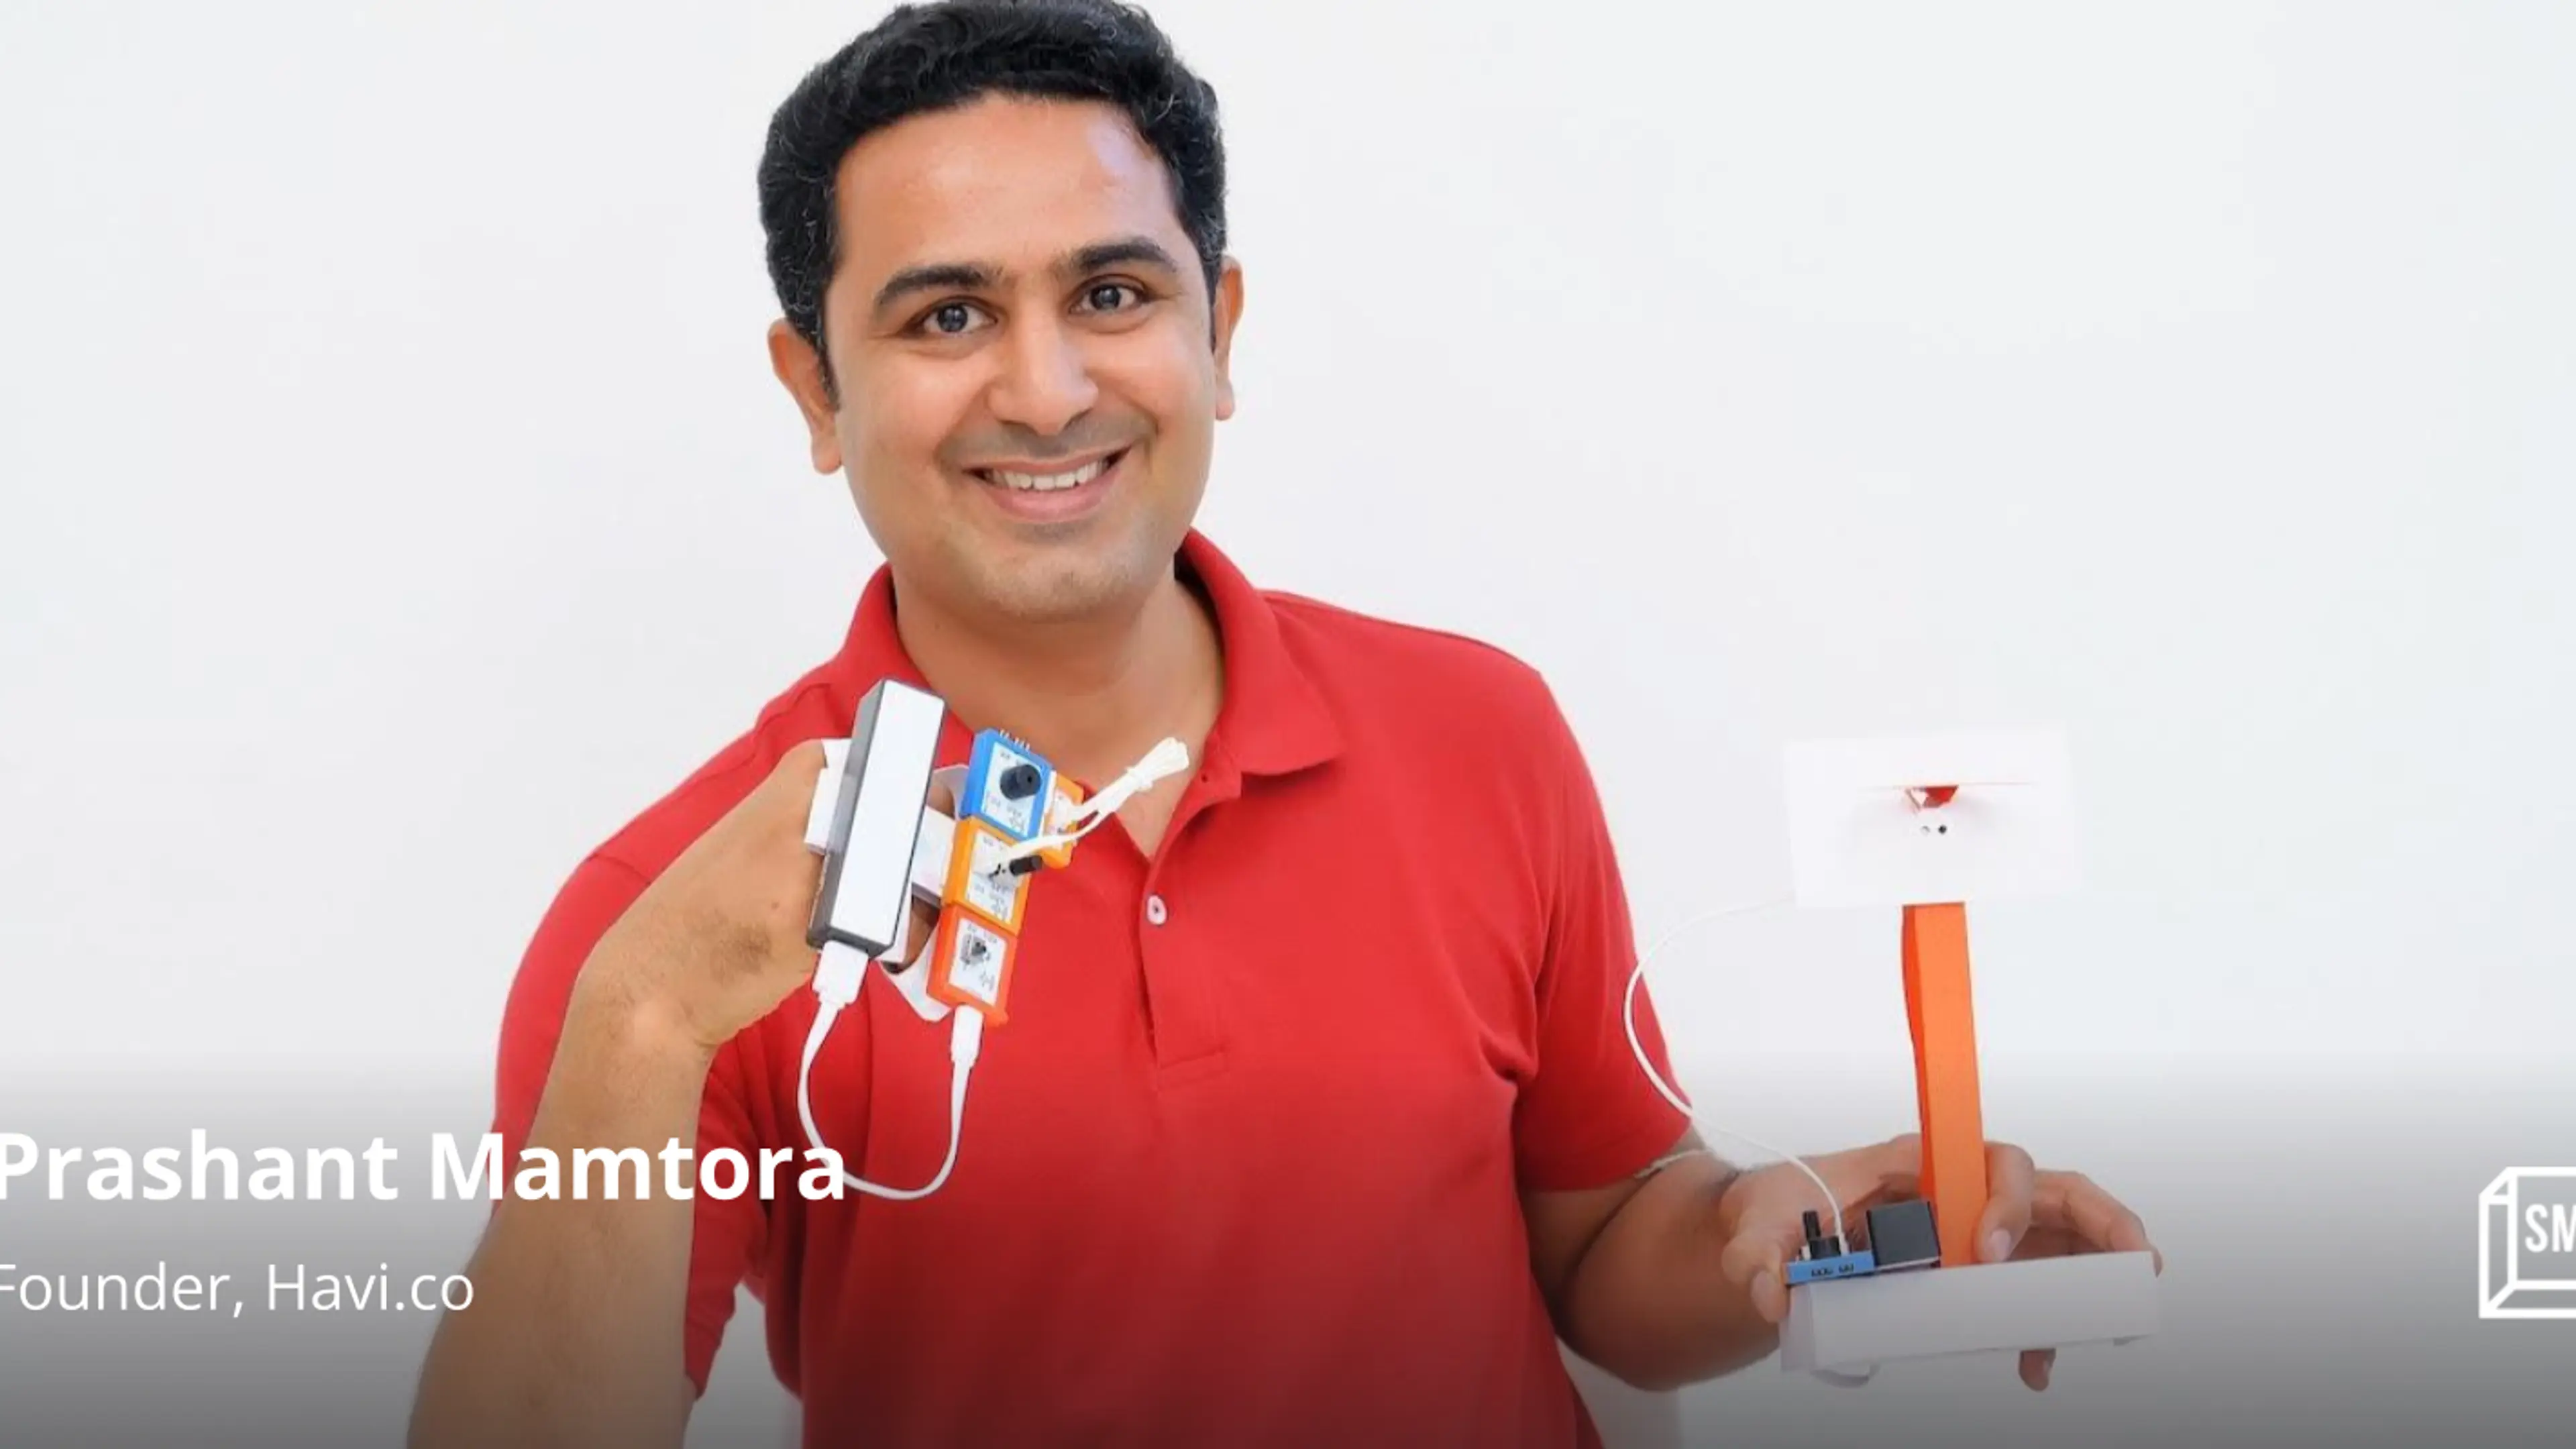 This Gujarat company wants to revolutionise playtime for children with its robotics toy kits